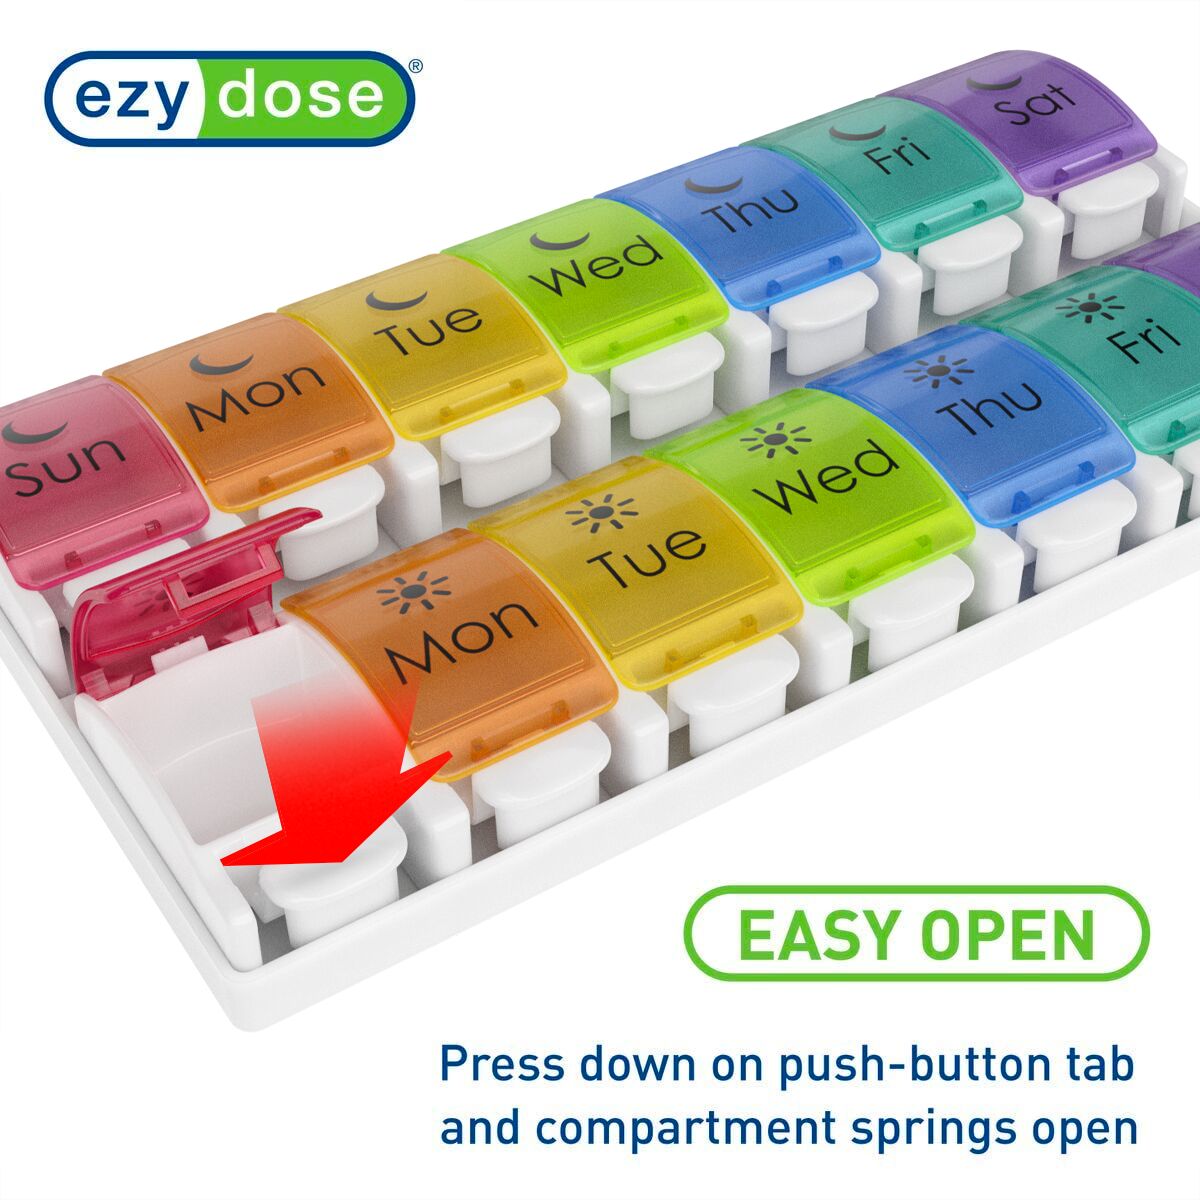 Ezy Dose® Rainbow Weekly 2x/Day Pill Planner